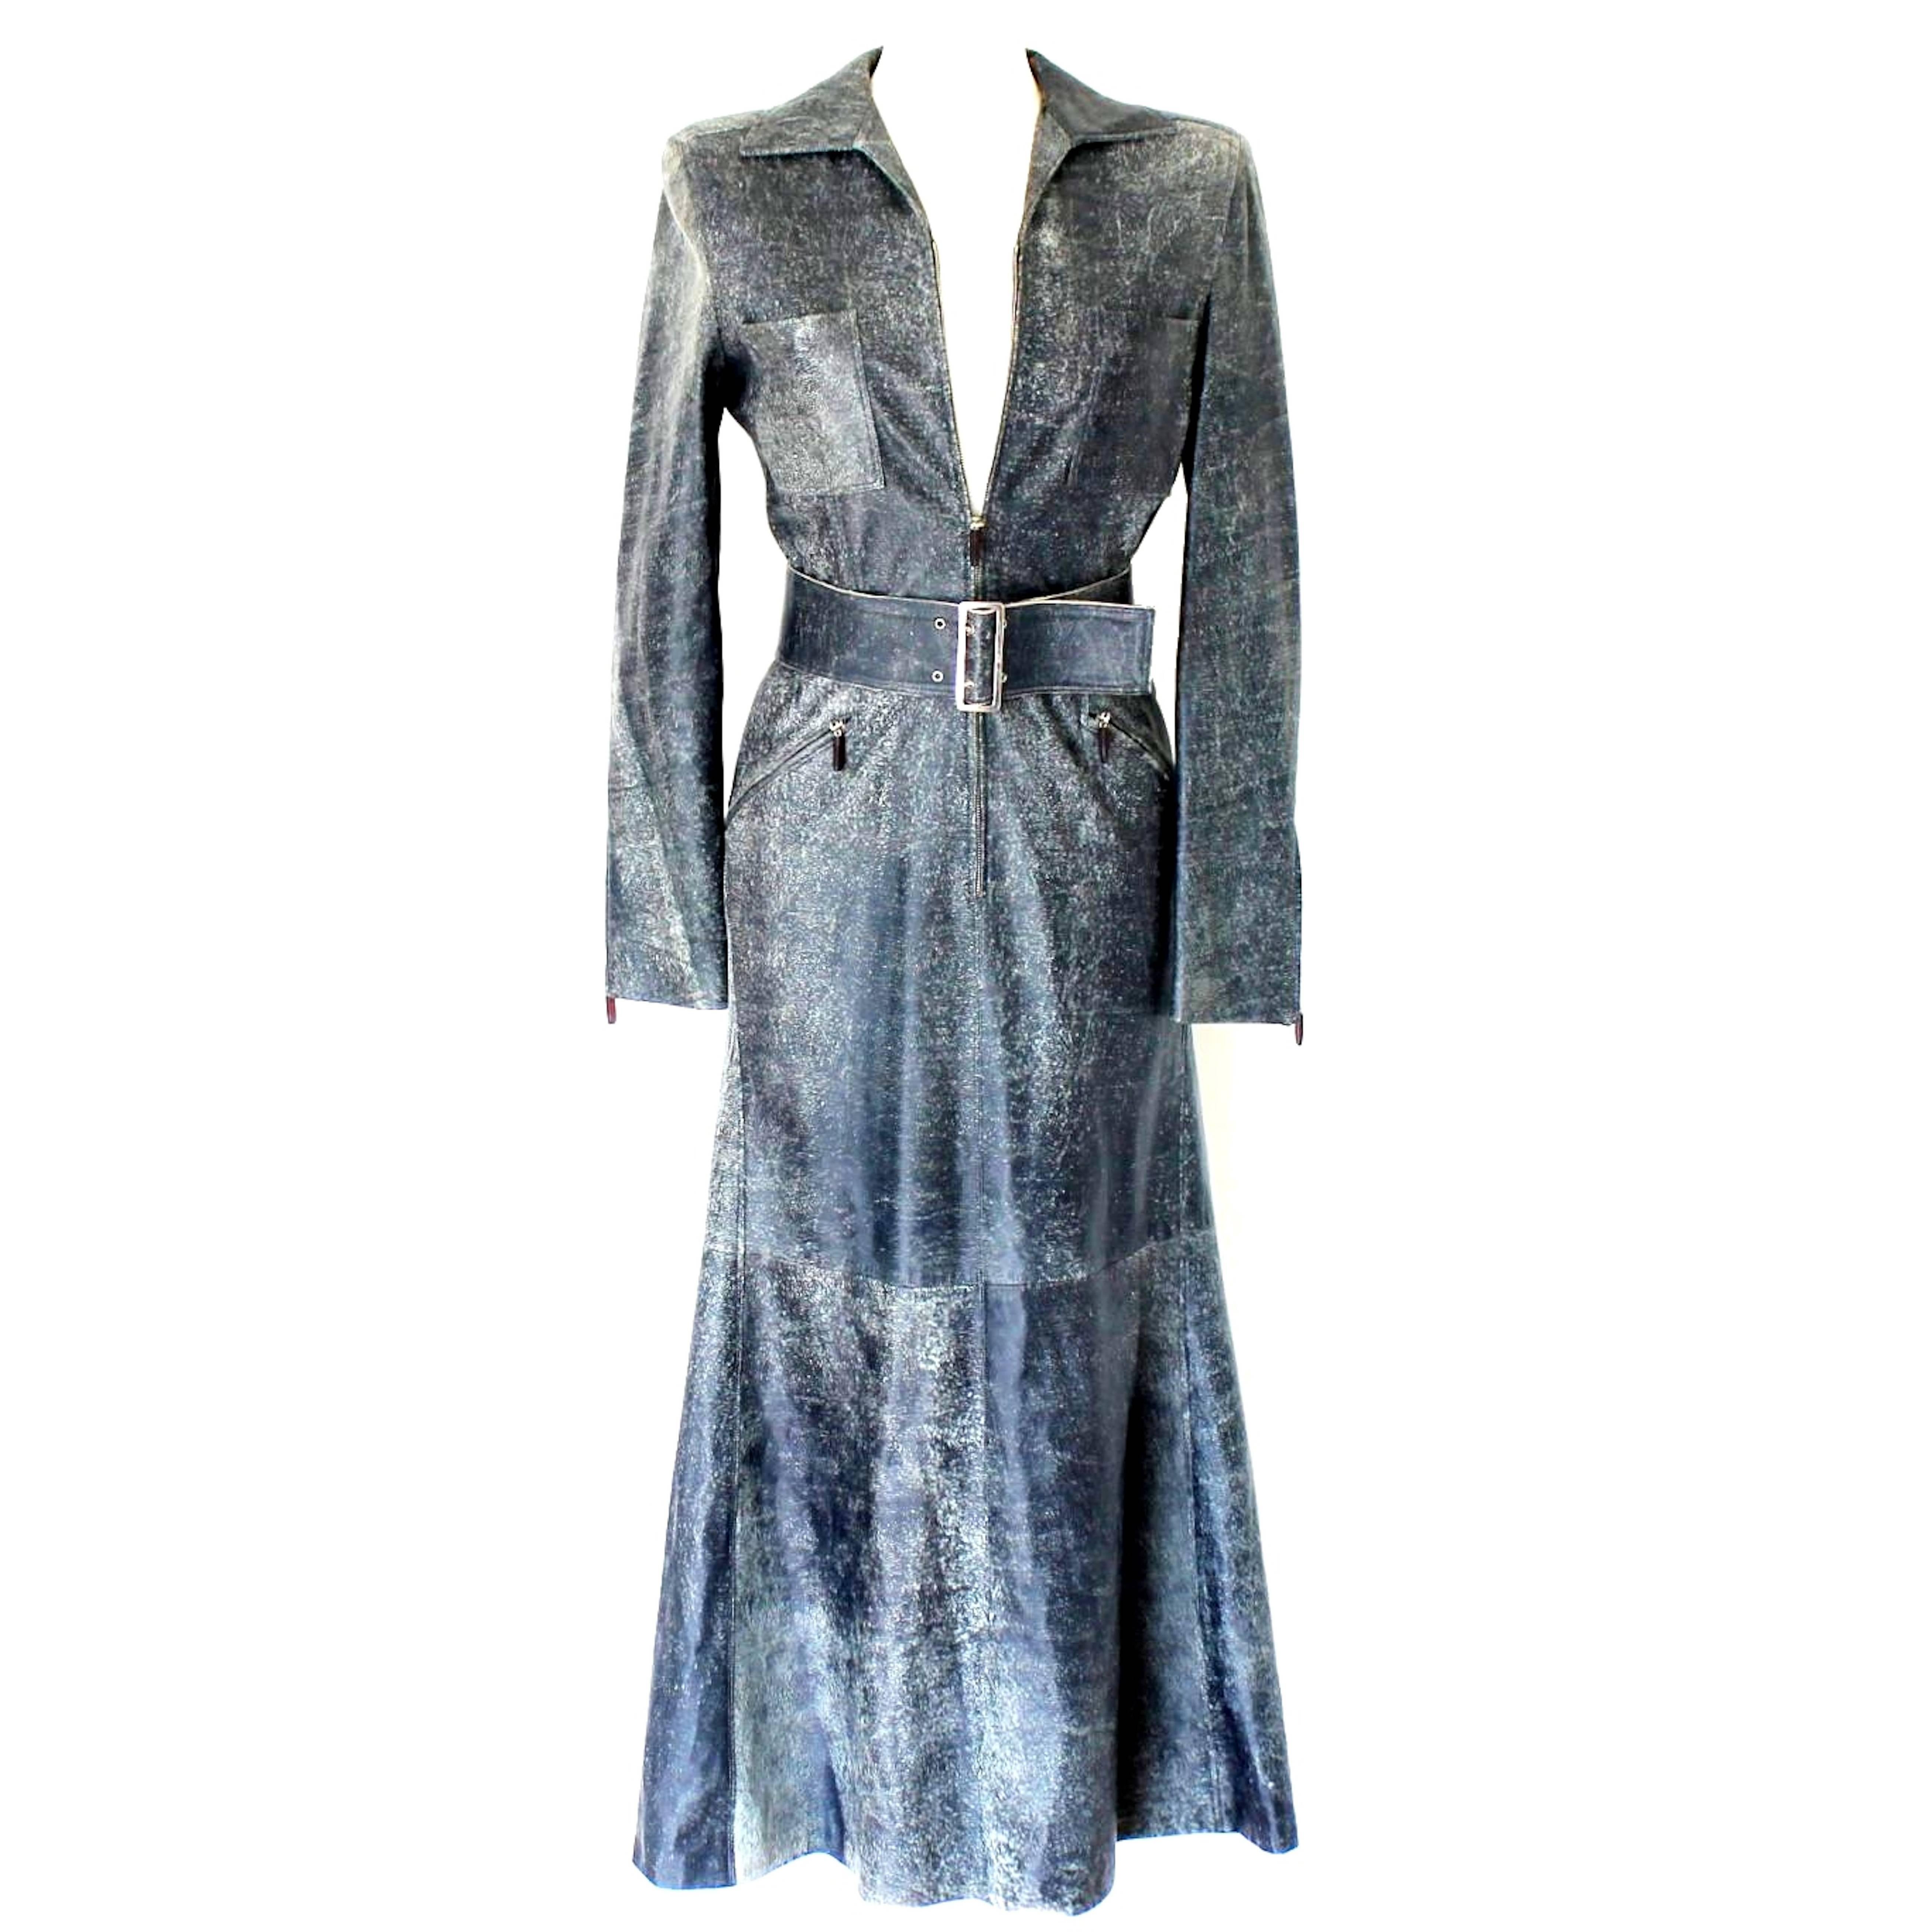 GIANNI VERSACE Demin/Jeans-Style Distressed Leather Dress Gown 2001 For Sale